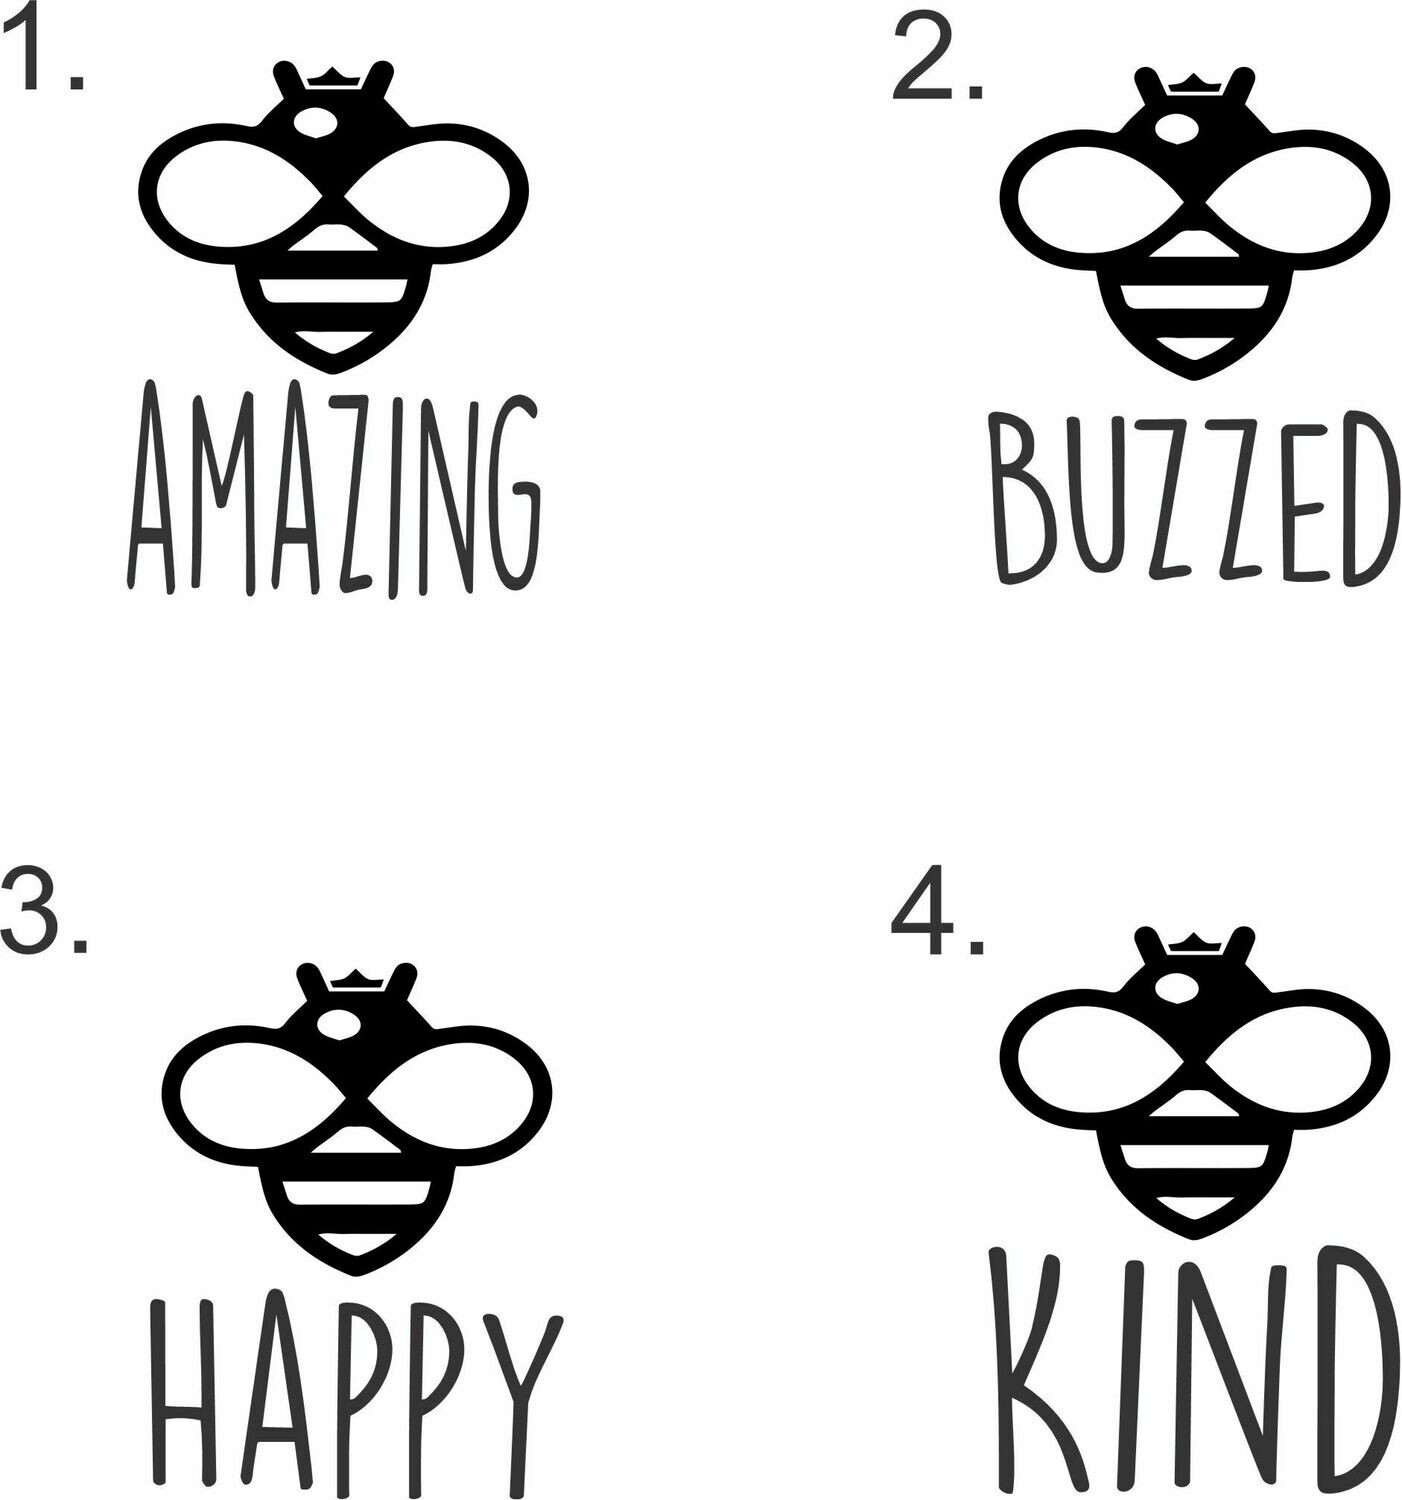 Leatherette 20 oz Bee Phrases (Amazing, Buzzed, Happy, Kind, or Your Word) Insulated Tumbler